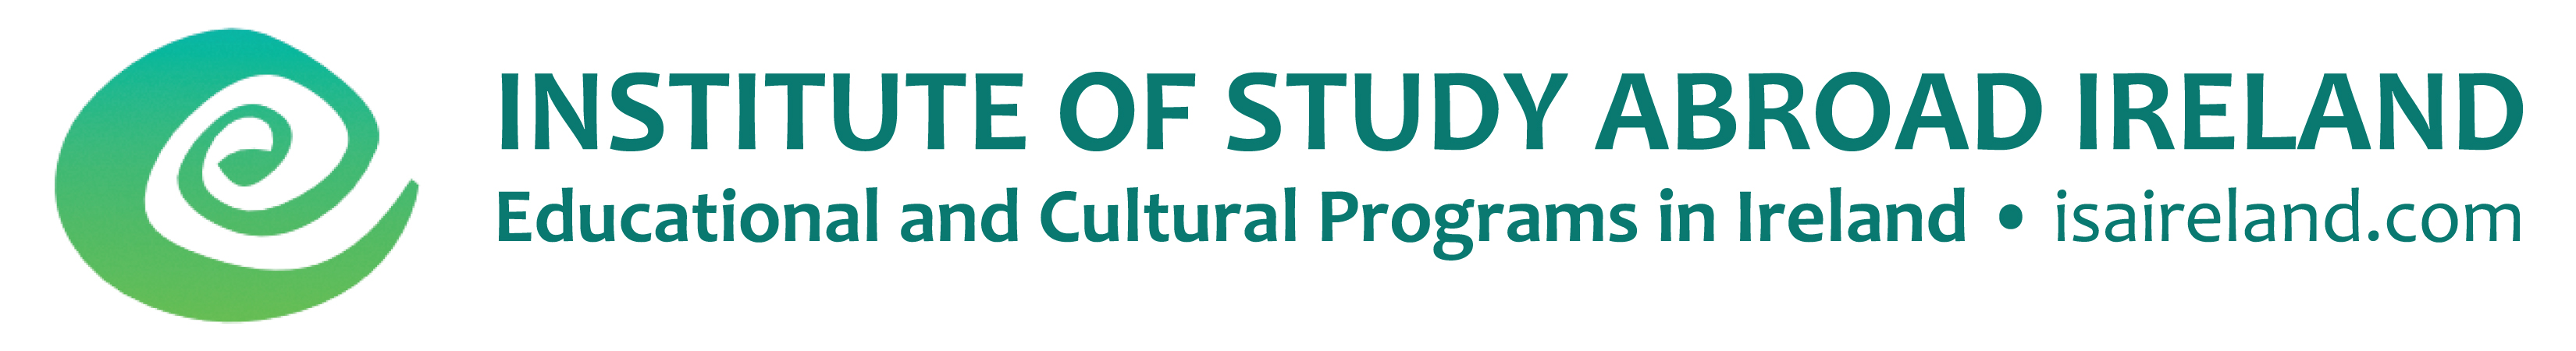 The Institute of Study Abroad Ireland specializes in arranging short-term faculty led trips for Community Colleges providing a full and inclusive program for students at very affordable prices. Many CCID member institutions have visited Ireland on our site visits, and over 14 community college groups visited Ireland in 2016.